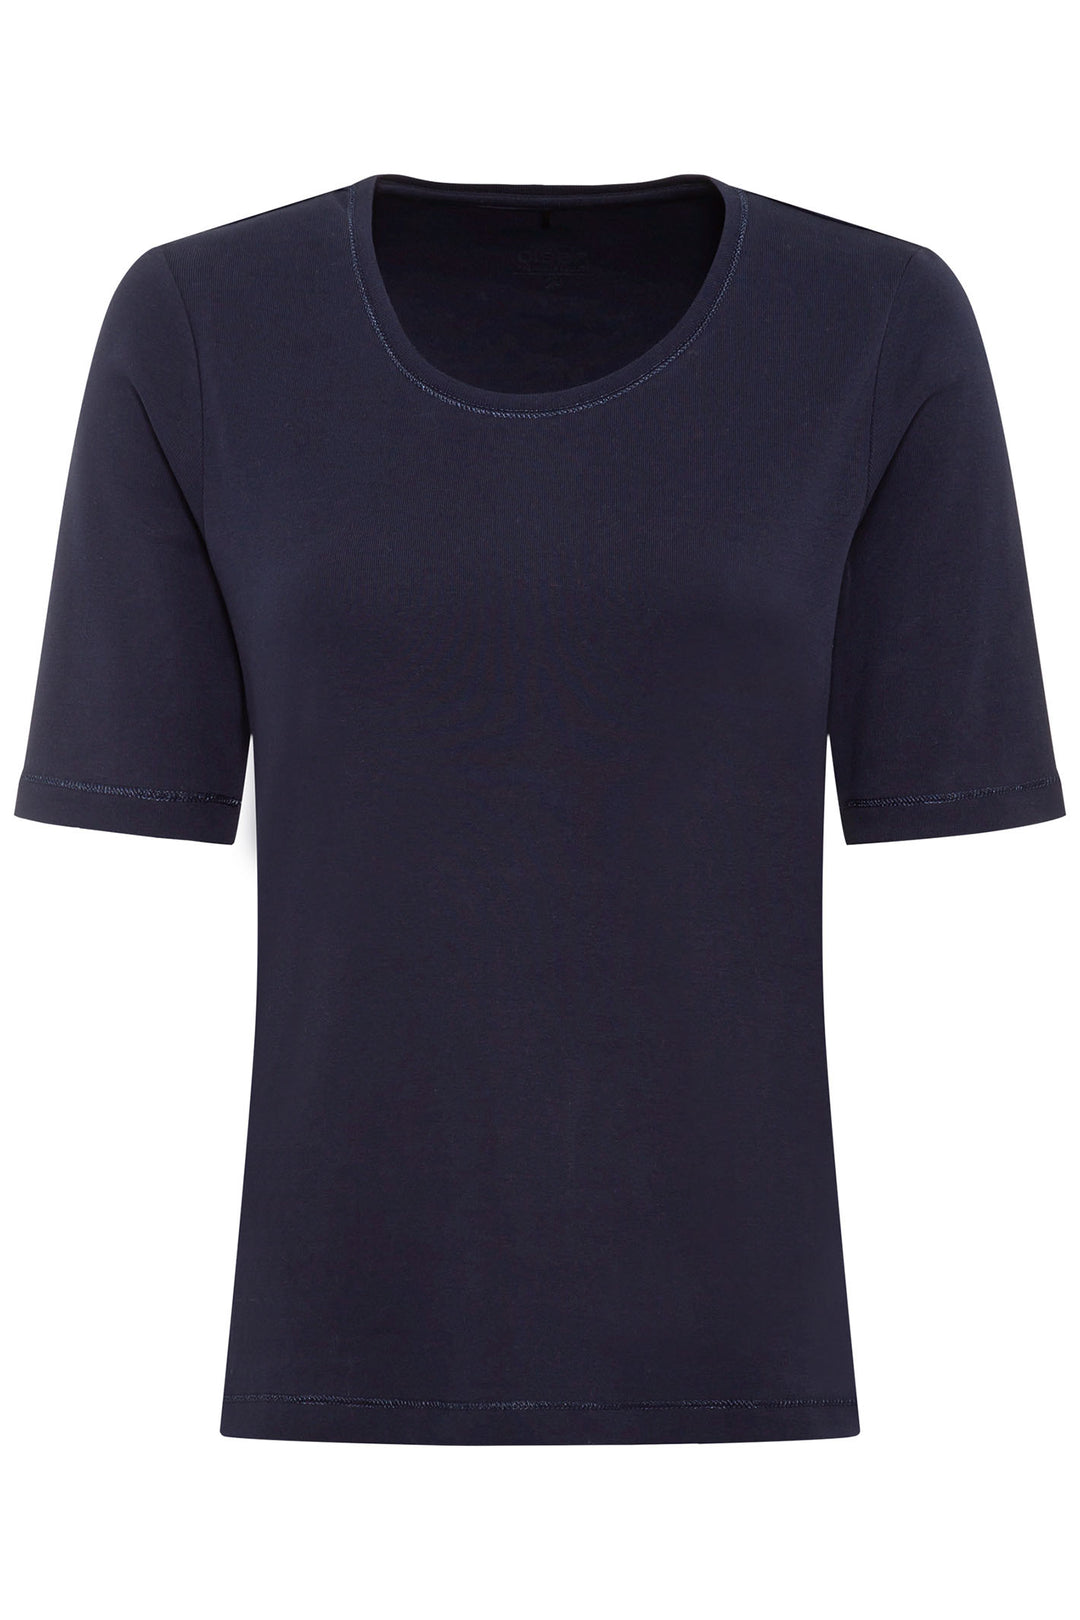 Olsen 11100177 Power Navy T-Shirt - Experience Boutique